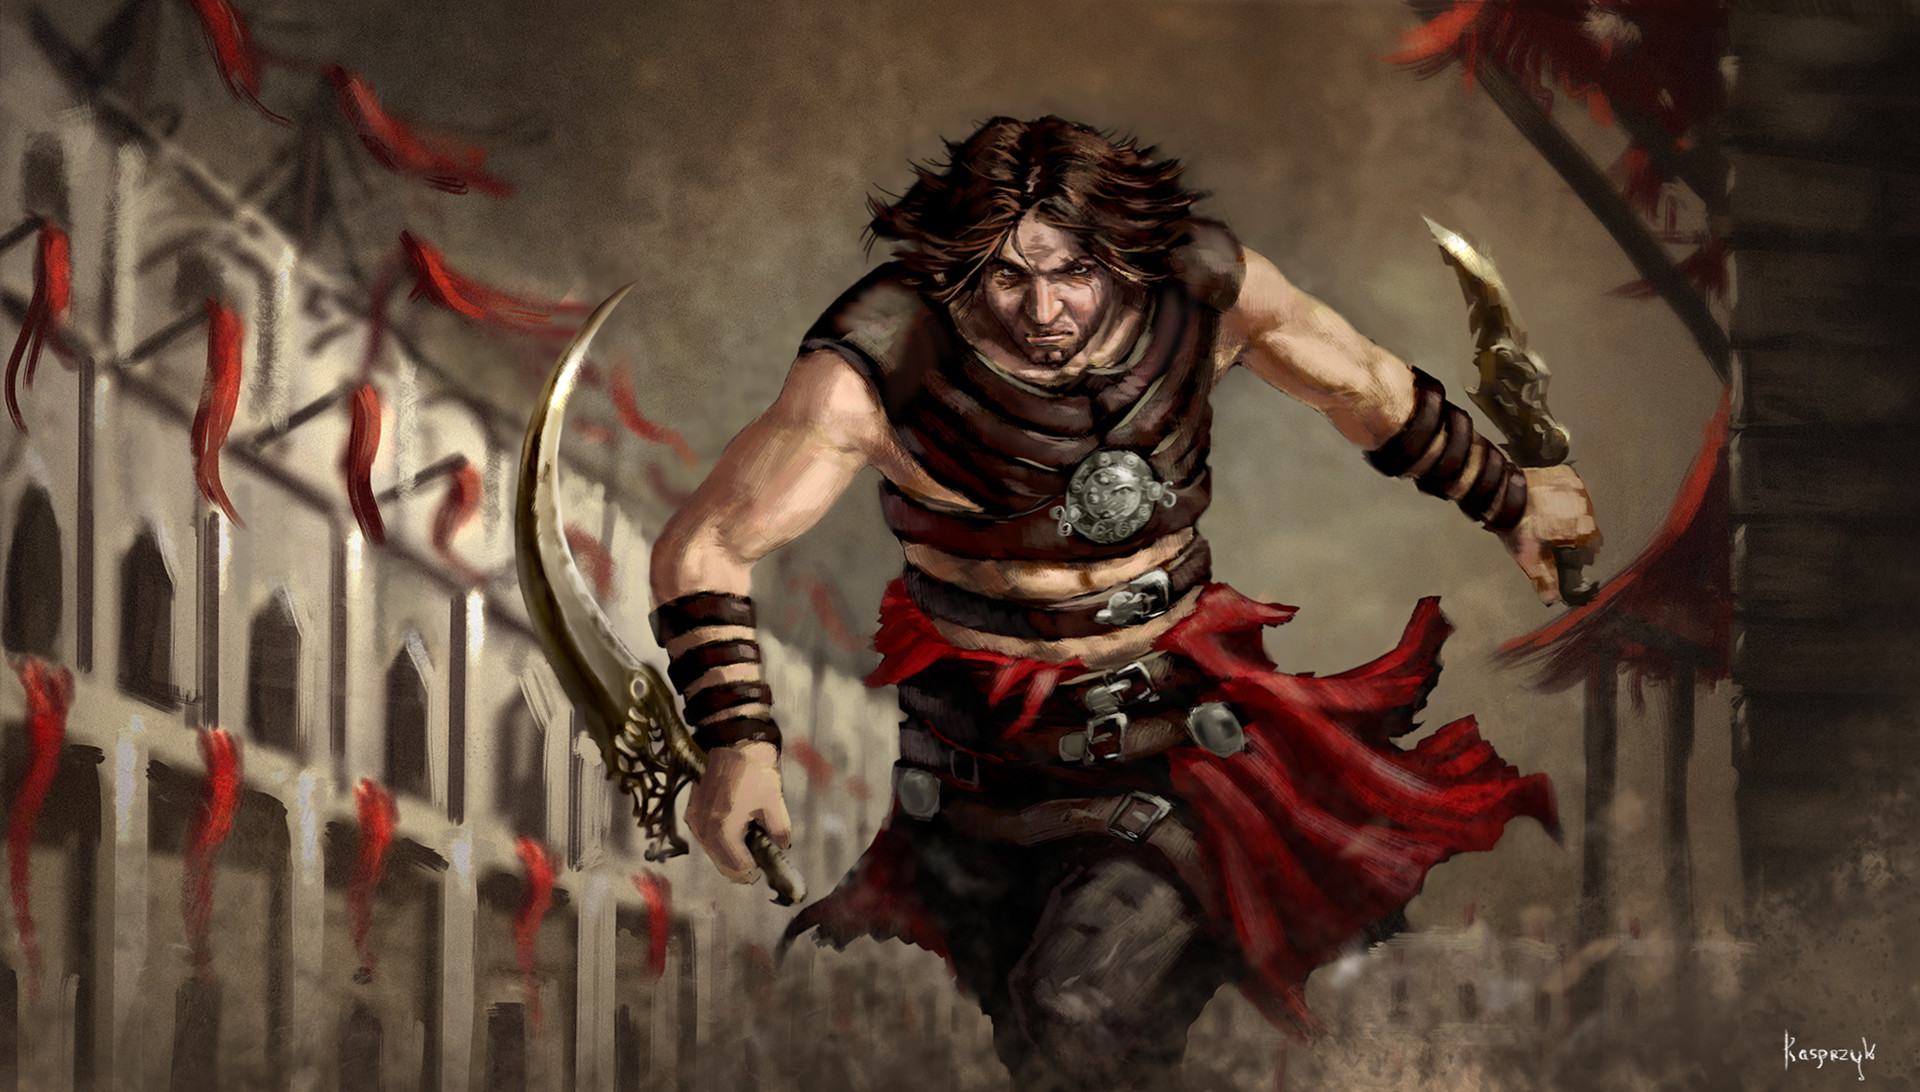 The rogue prince of persia. Prince of Persia: Warrior within. Prince of Persia Fan Art.